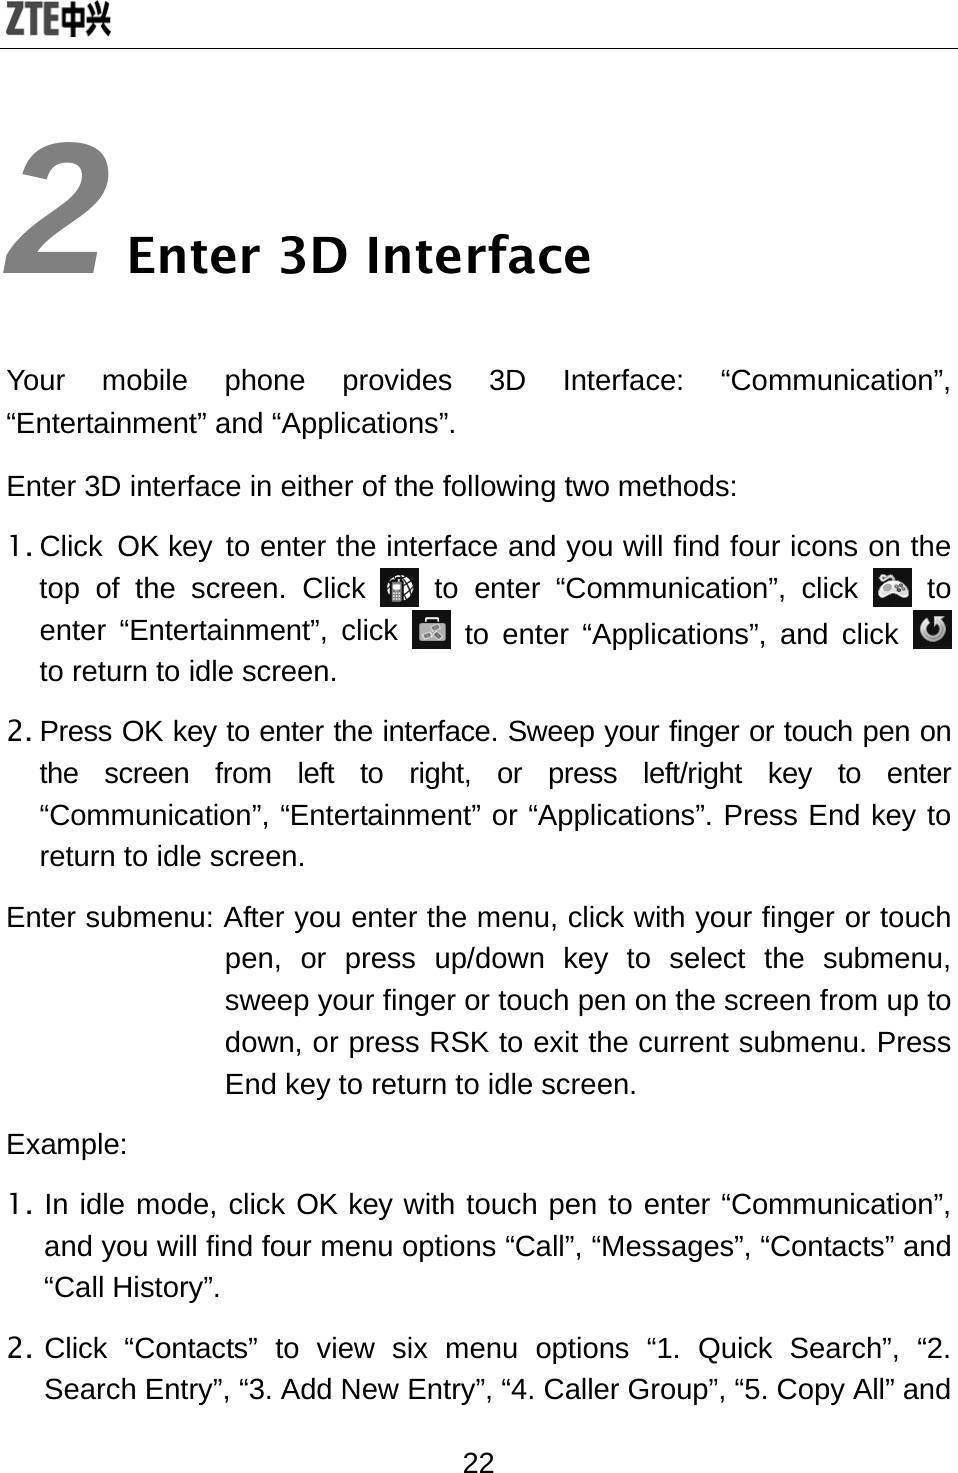  22 2 Enter 3D Interface Your mobile phone provides 3D Interface: “Communication”, “Entertainment” and “Applications”.   Enter 3D interface in either of the following two methods:   1. Click OK key to enter the interface and you will find four icons on the top of the screen. Click   to enter “Communication”, click   to enter “Entertainment”, click   to enter “Applications”, and click   to return to idle screen. 2. Press OK key to enter the interface. Sweep your finger or touch pen on the screen from left to right, or press left/right key to enter “Communication”, “Entertainment” or “Applications”. Press End key to return to idle screen. Enter submenu: After you enter the menu, click with your finger or touch pen, or press up/down key to select the submenu, sweep your finger or touch pen on the screen from up to down, or press RSK to exit the current submenu. Press End key to return to idle screen. Example: 1. In idle mode, click OK key with touch pen to enter “Communication”, and you will find four menu options “Call”, “Messages”, “Contacts” and “Call History”.   2. Click “Contacts” to view six menu options “1. Quick Search”, “2. Search Entry”, “3. Add New Entry”, “4. Caller Group”, “5. Copy All” and 